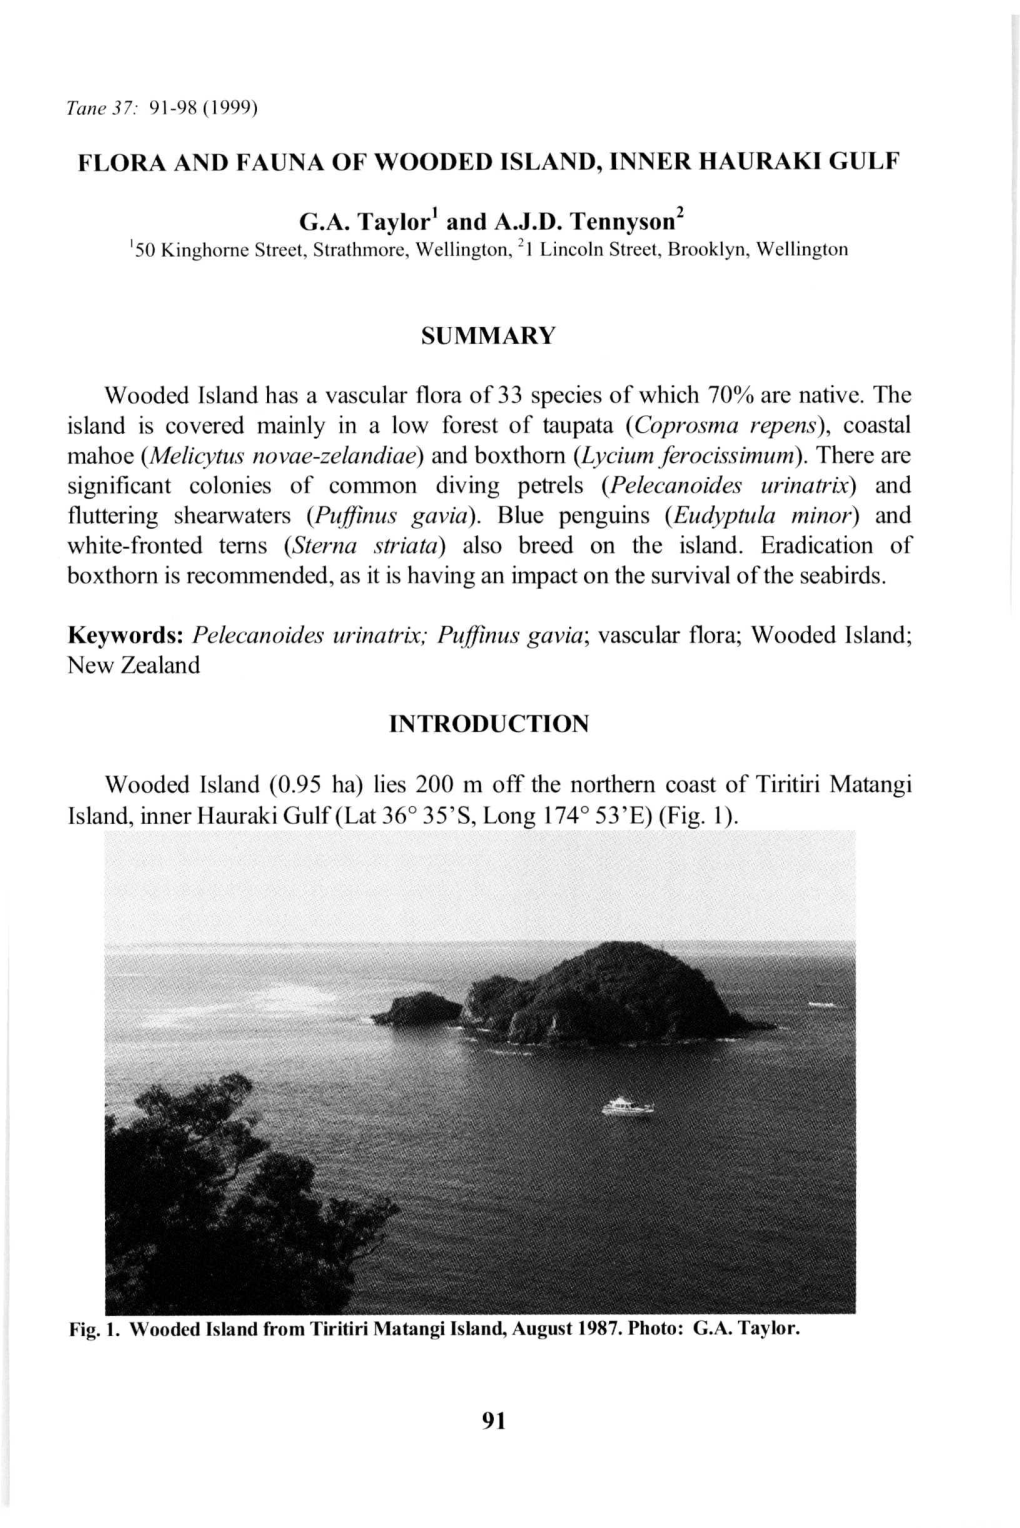 Flora and Fauna of Wooded Island, Inner Hauraki Gulf, by G.A. Taylor